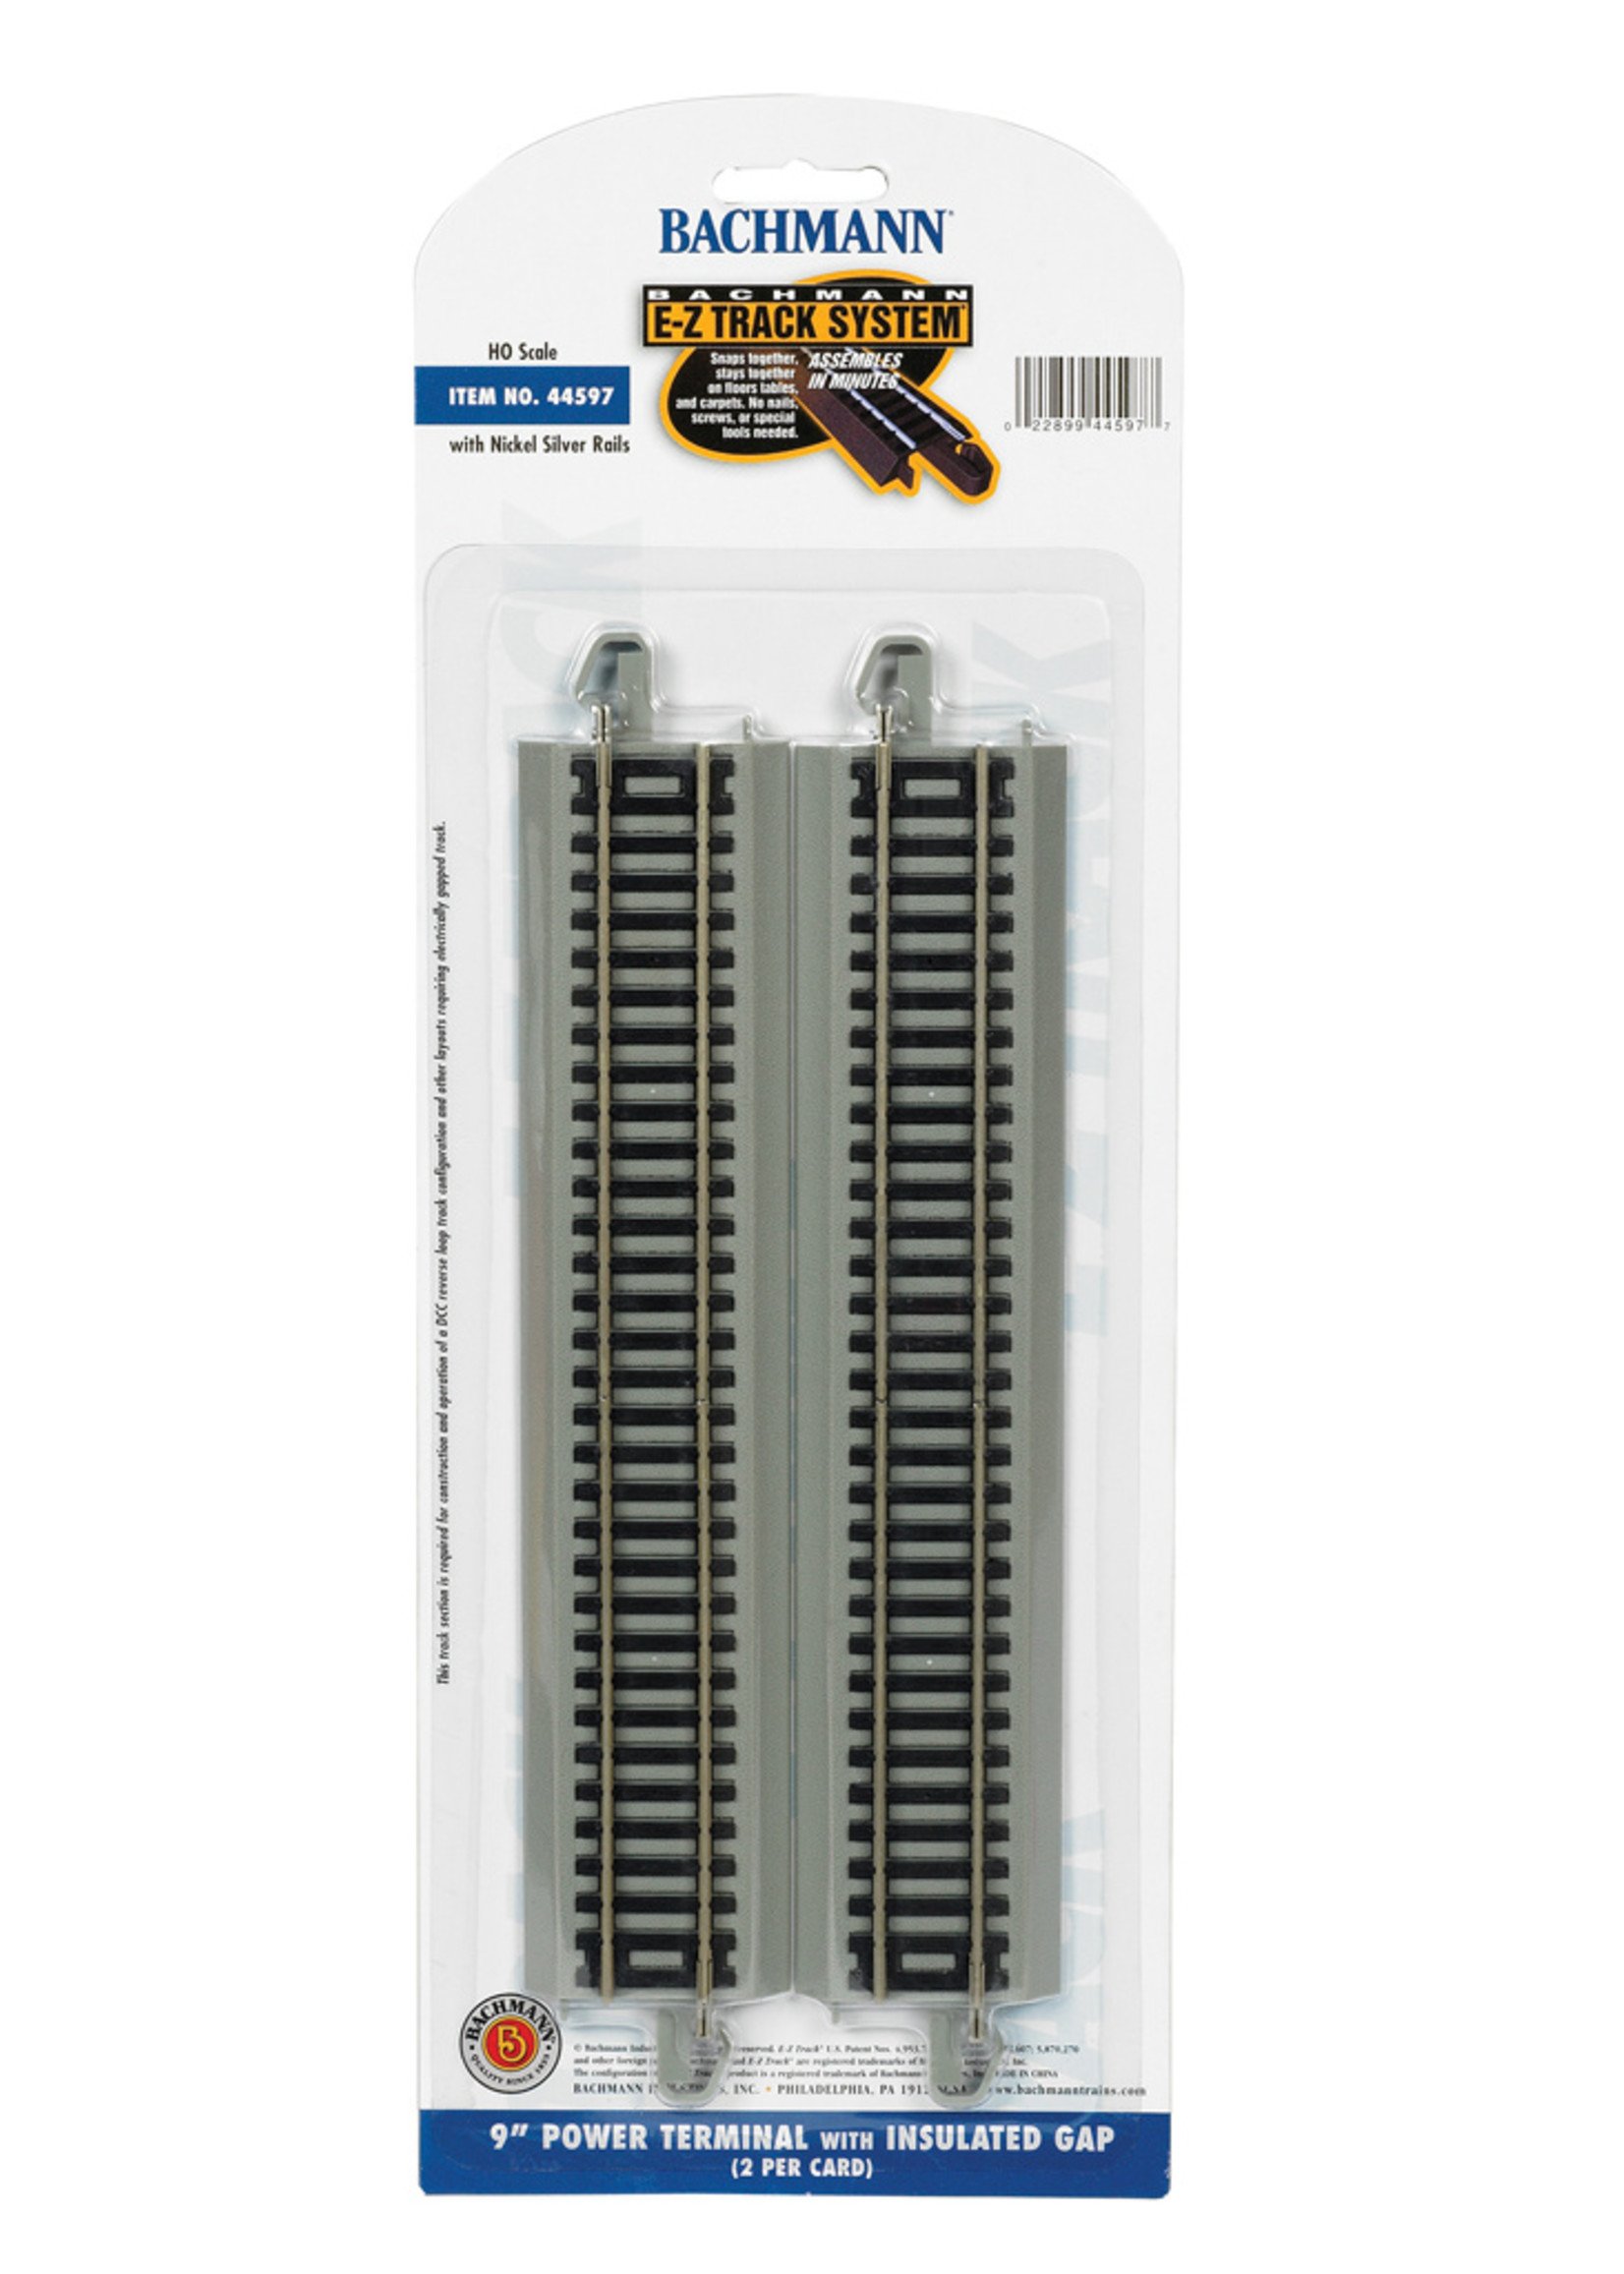 Bachmann 44597 - 9" Power Terminal with Insulated Gap HO Scale EZ Track